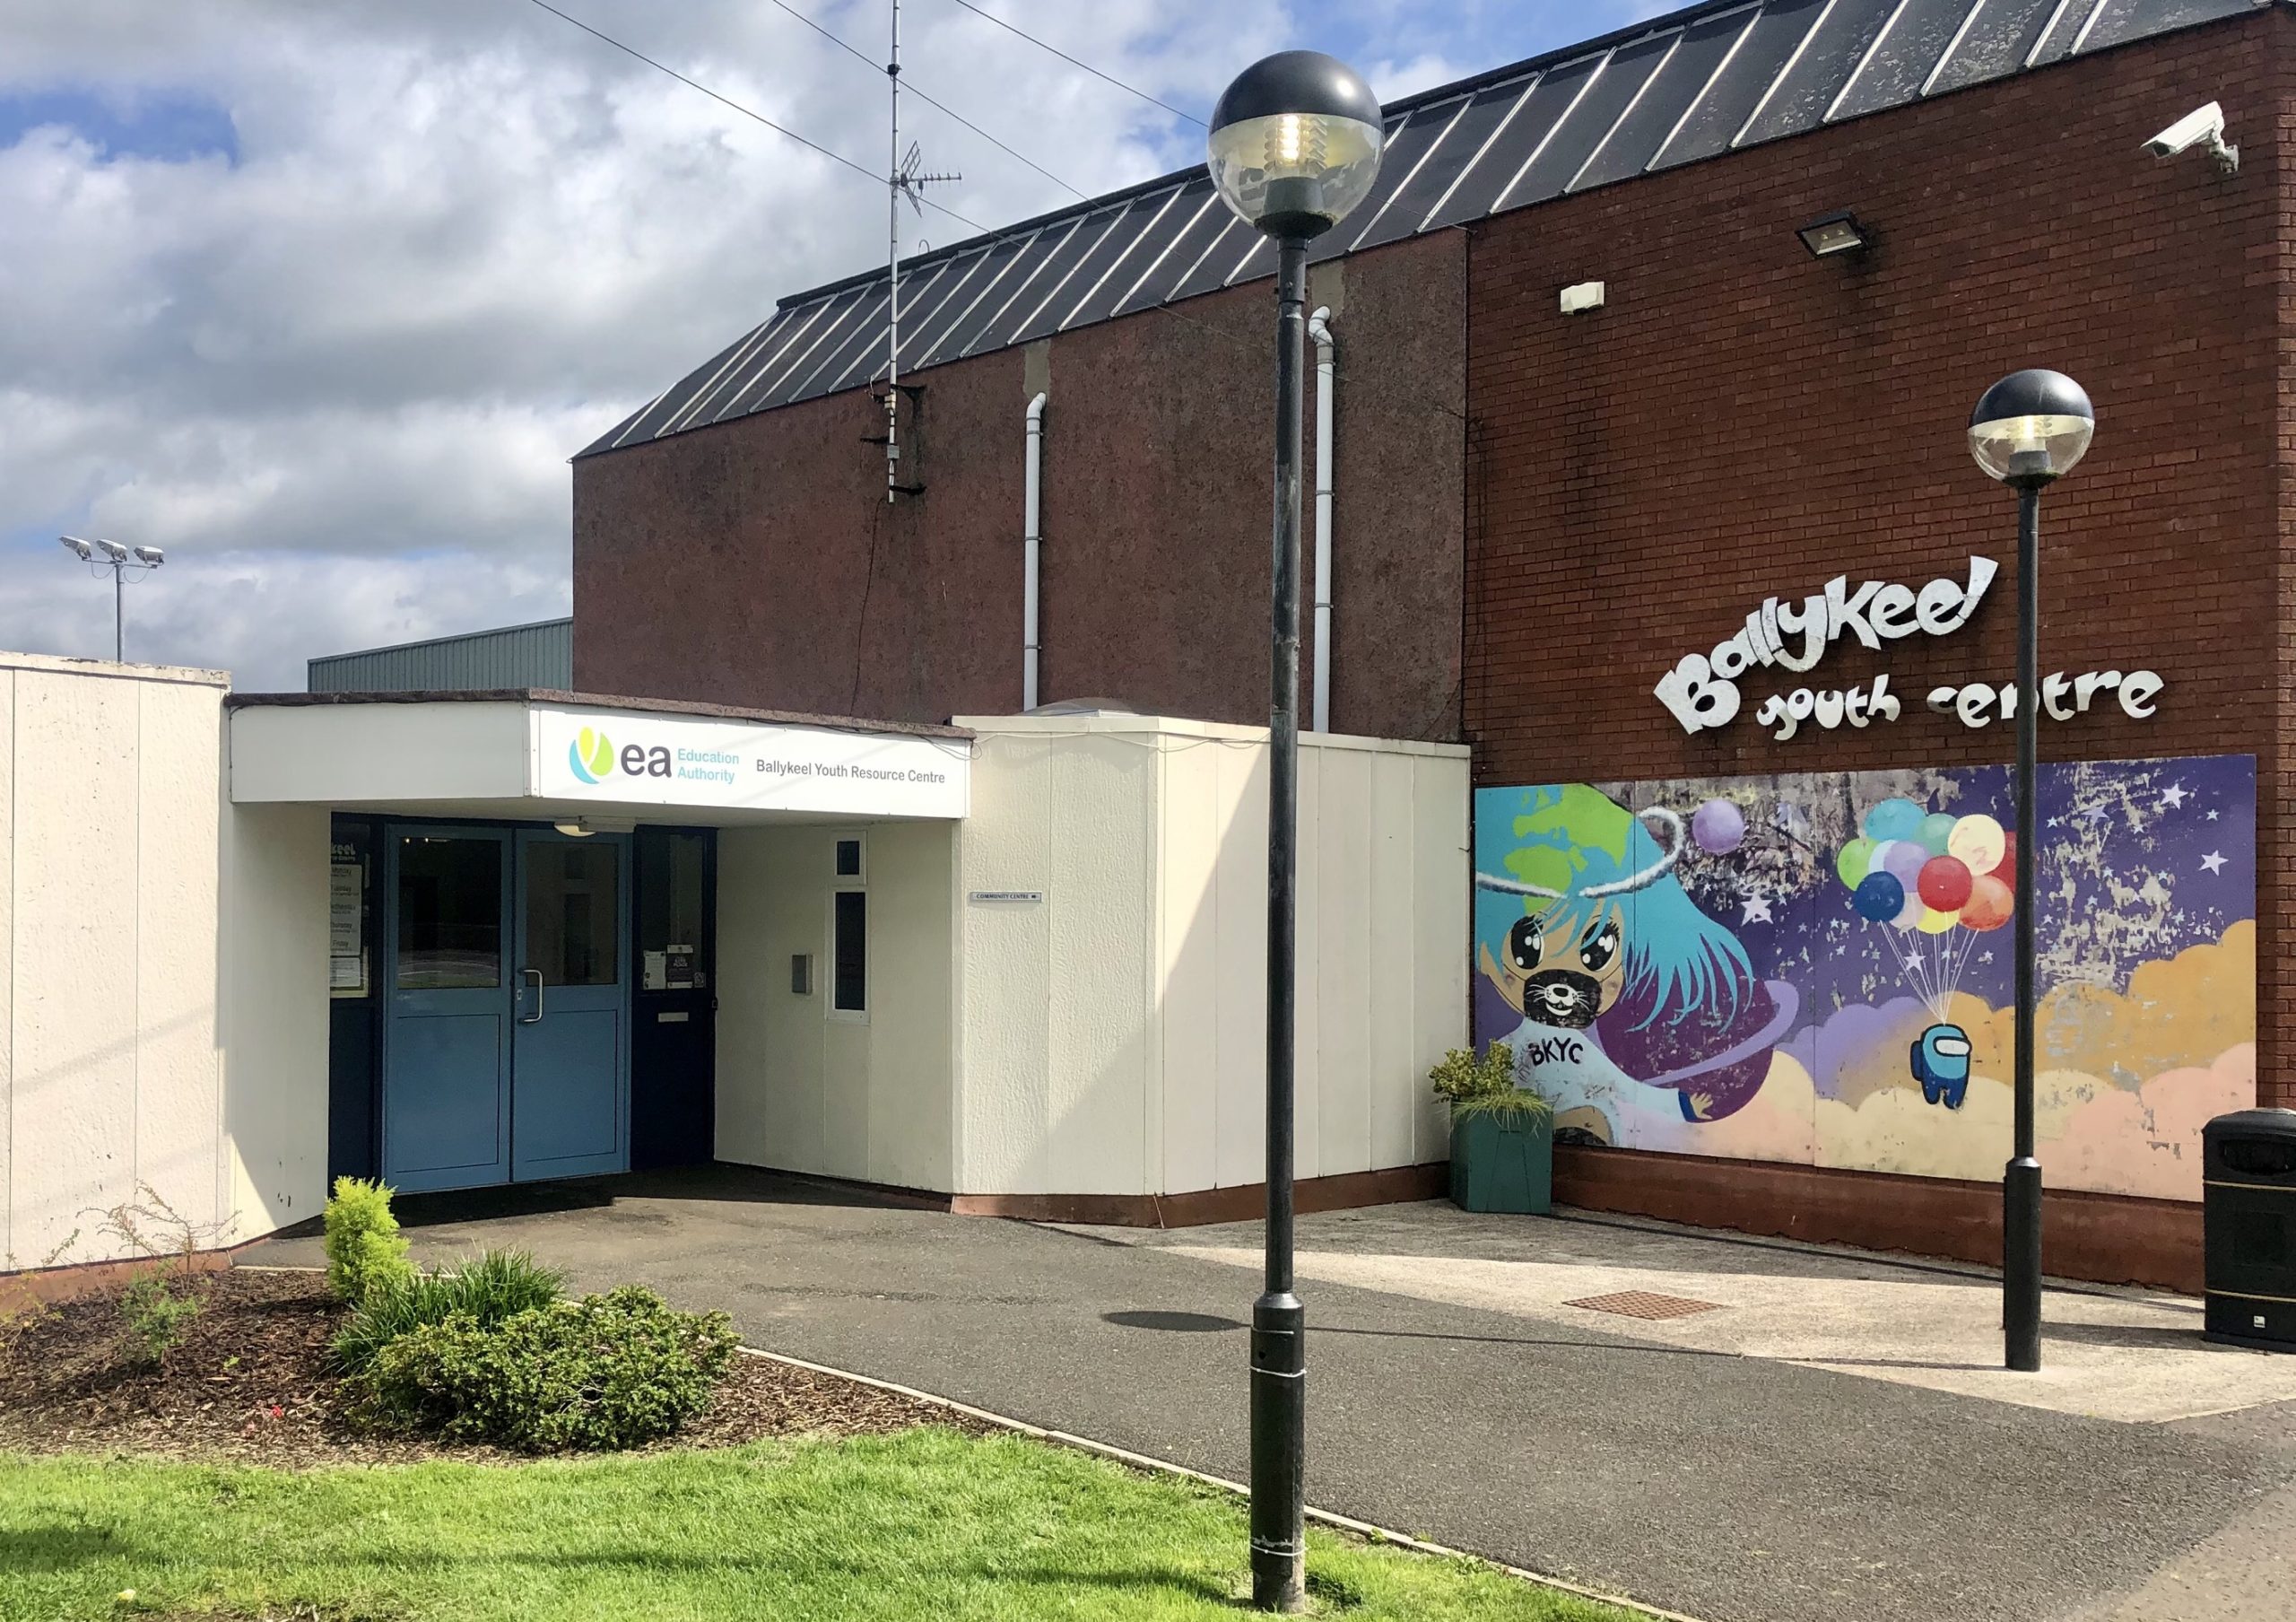 Front of Ballykeel. The door is on the left side and there is a large mural of a bear and a robot with balloons. There is a large "Ballykeel Youth Centre" sign above the mural